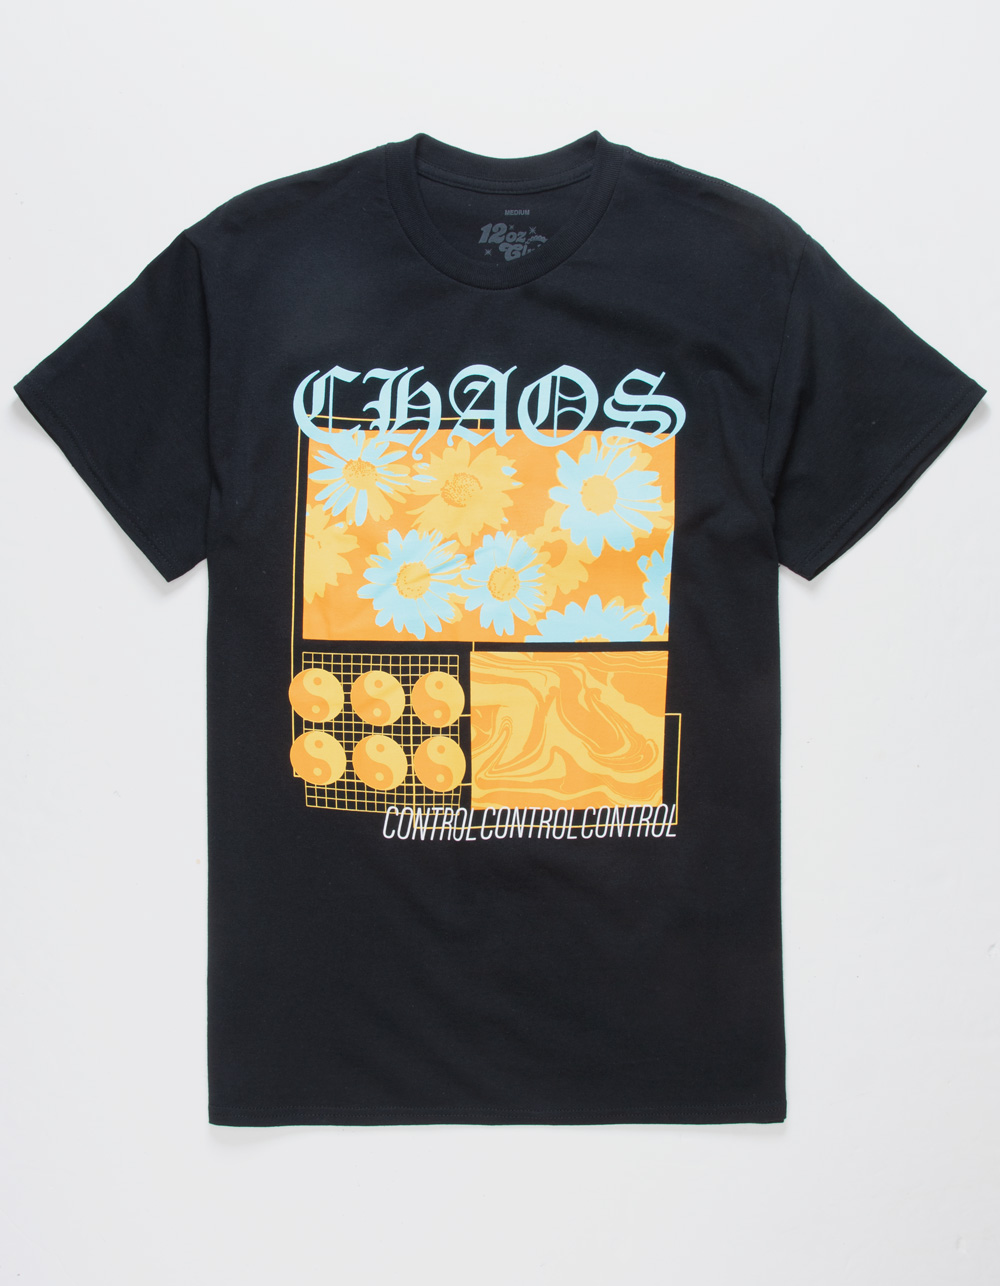 Absorbere delvist Nord 12OZ CLUB Controlled Chaos Mens Tee - BLACK | Tillys